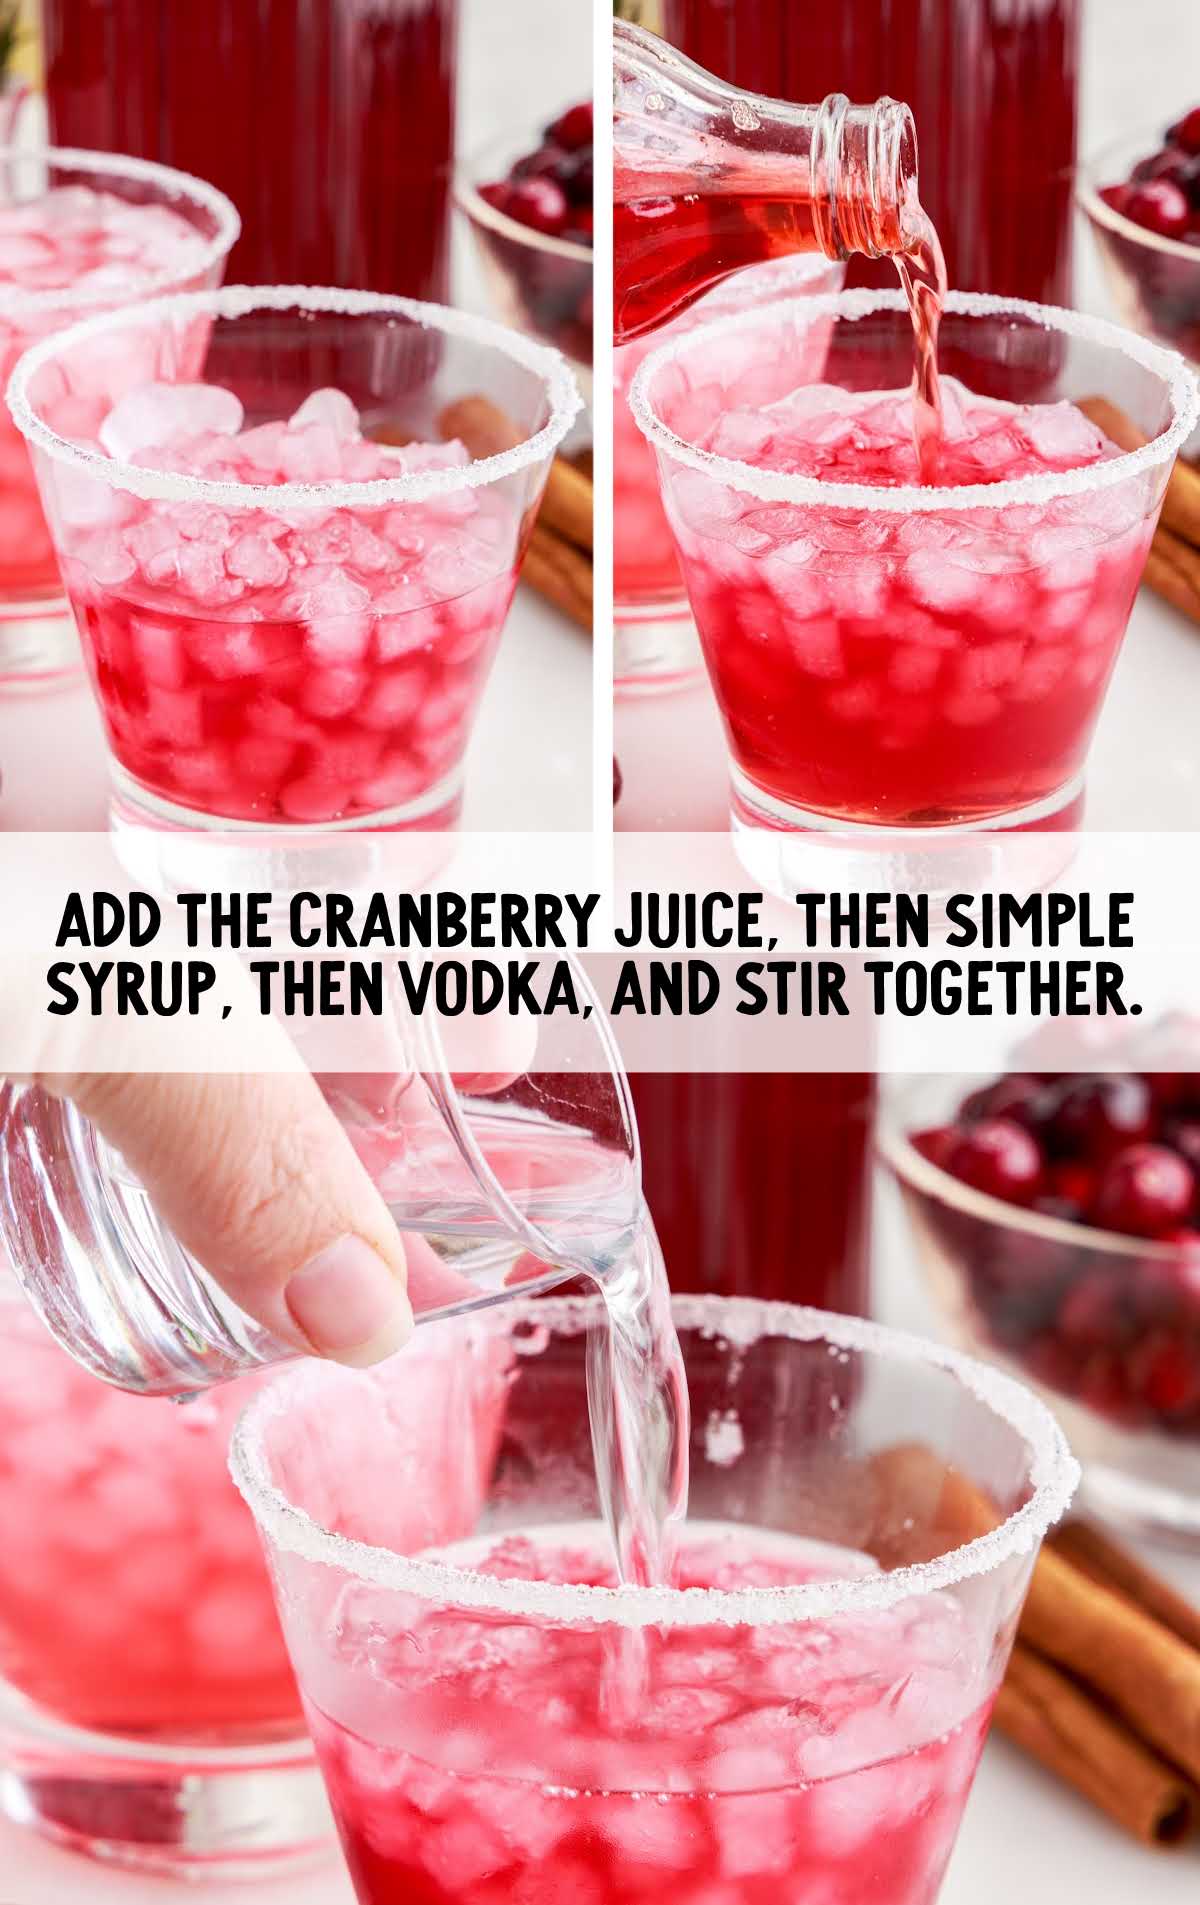 cranberry juice, simple syrup, and vodka added to the glass